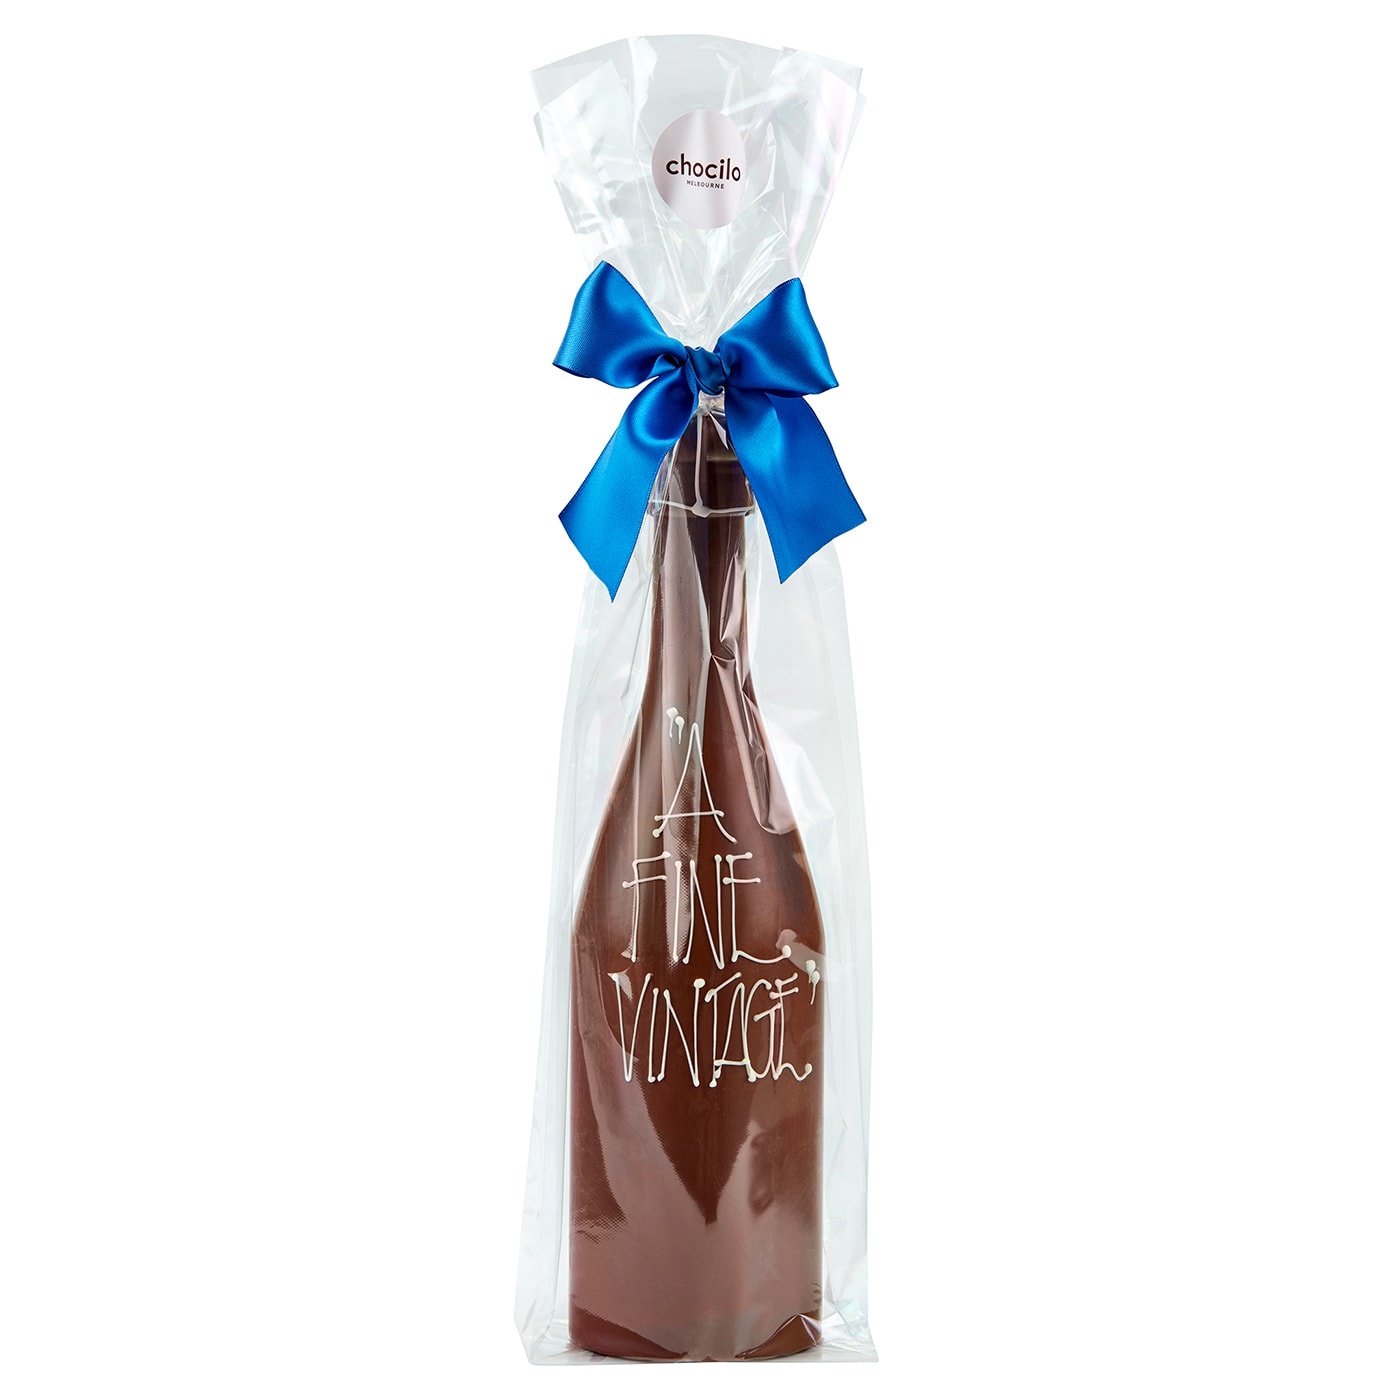 Chocilo Melbourne Father's Day 'A Fine Vintage' Champagne Bottle in Milk Chocolate GIft